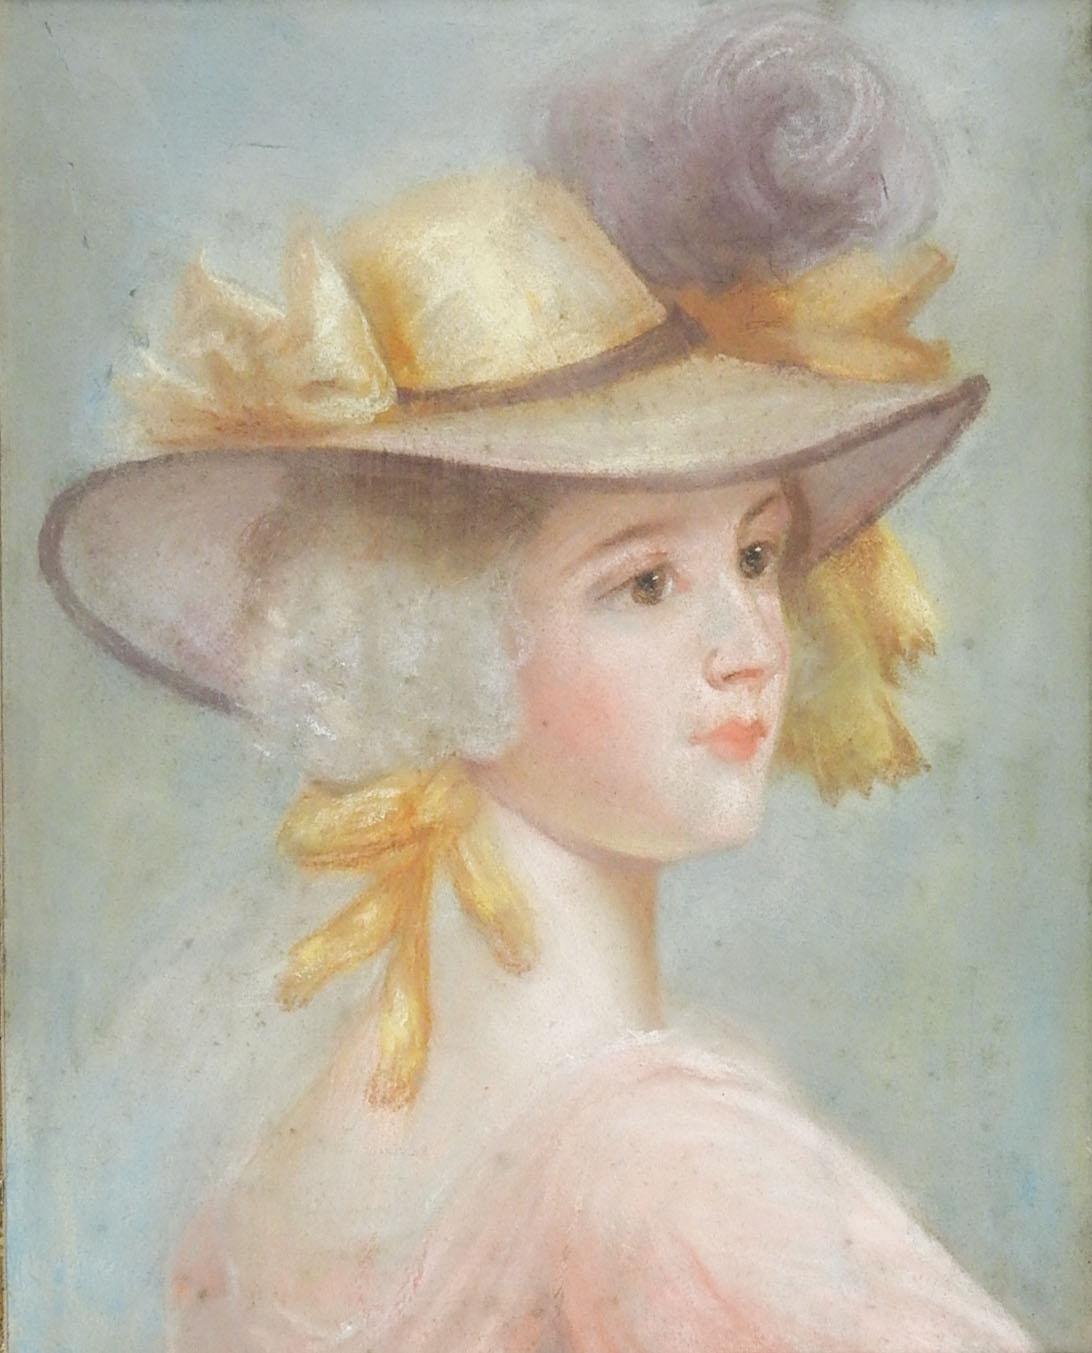 1930s Georgian Era Lady Pastel Portrait Painting In Good Condition For Sale In Seguin, TX